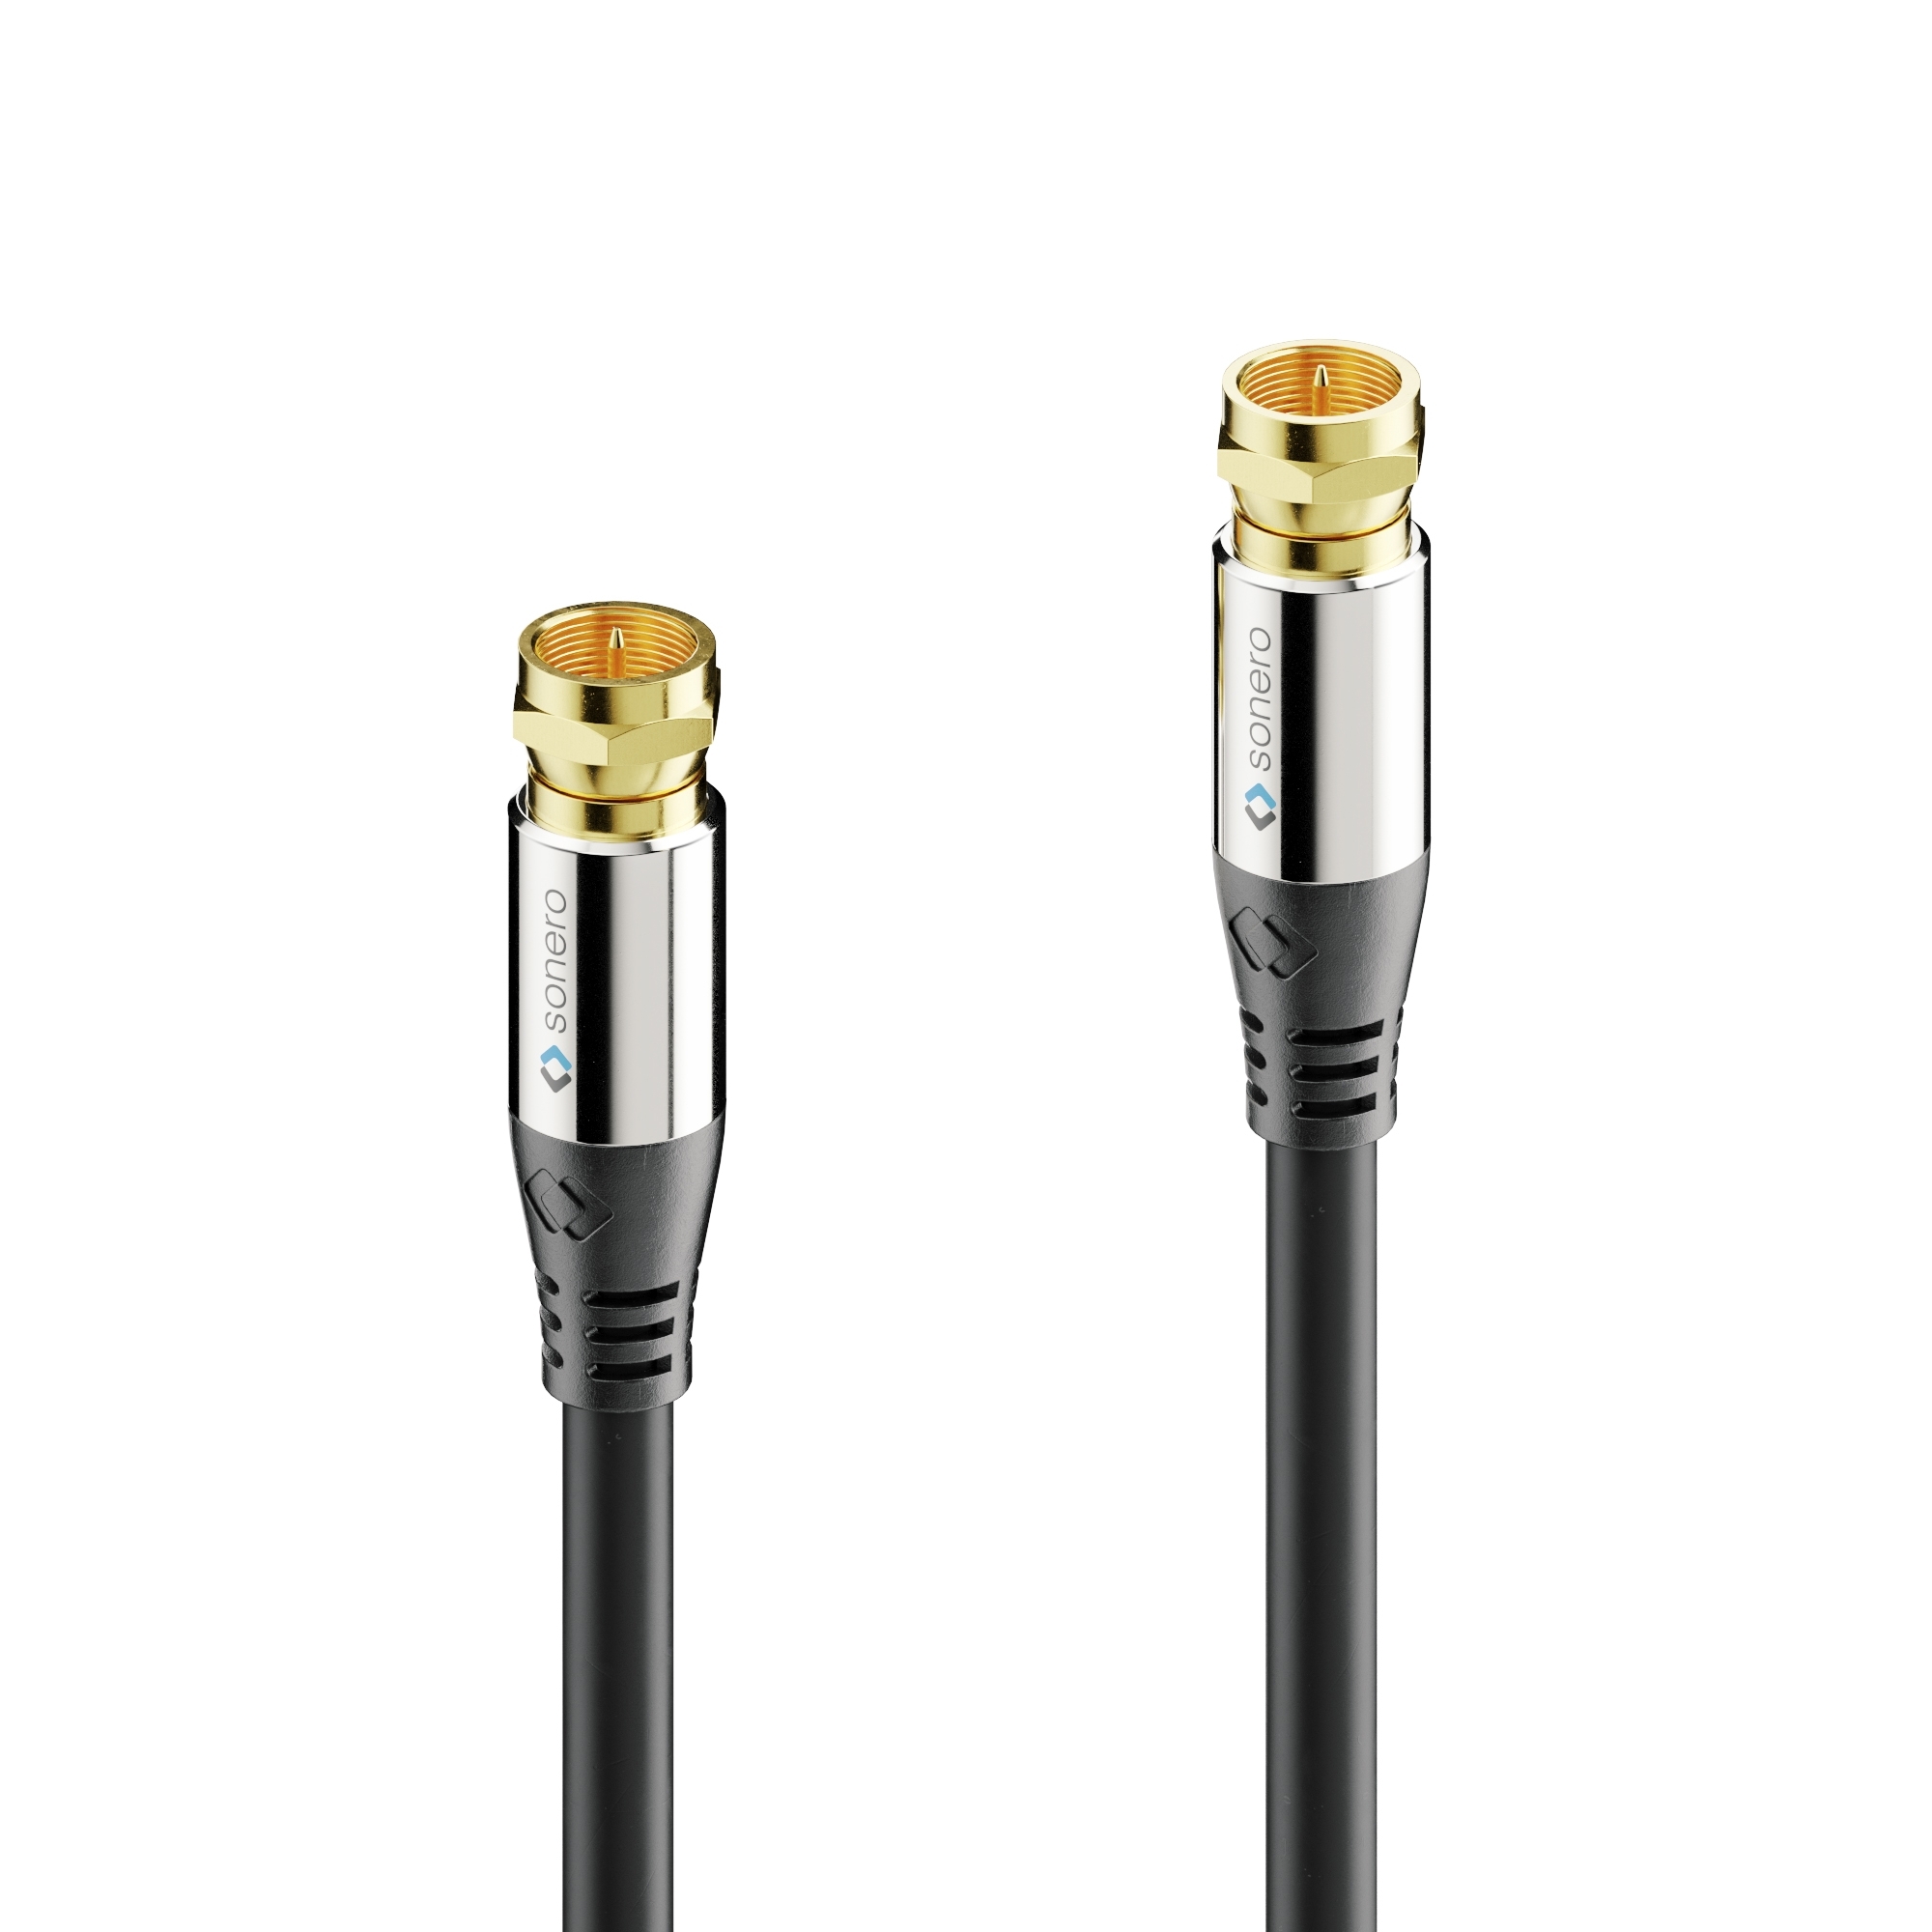 65.62 ft. Black deleyCON SAT Antenna Cable 20m Coaxial Satellite Cable Gold-plated F-type connector Right angle Metal Connector UltraHD FullHD